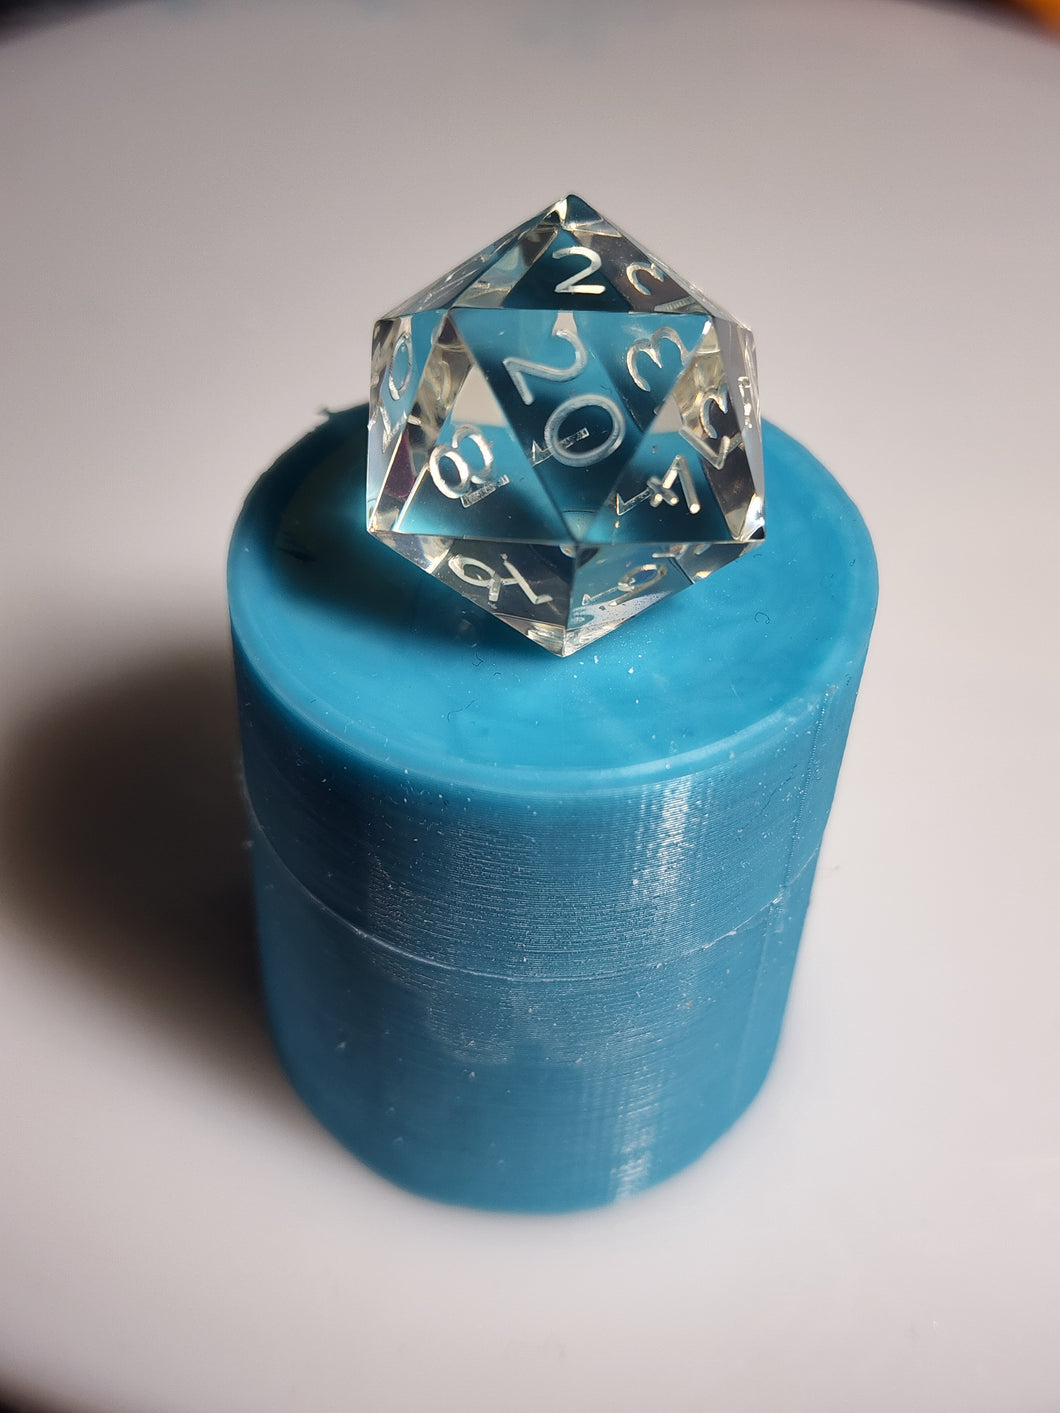 Single Polyhedral Dice Molds